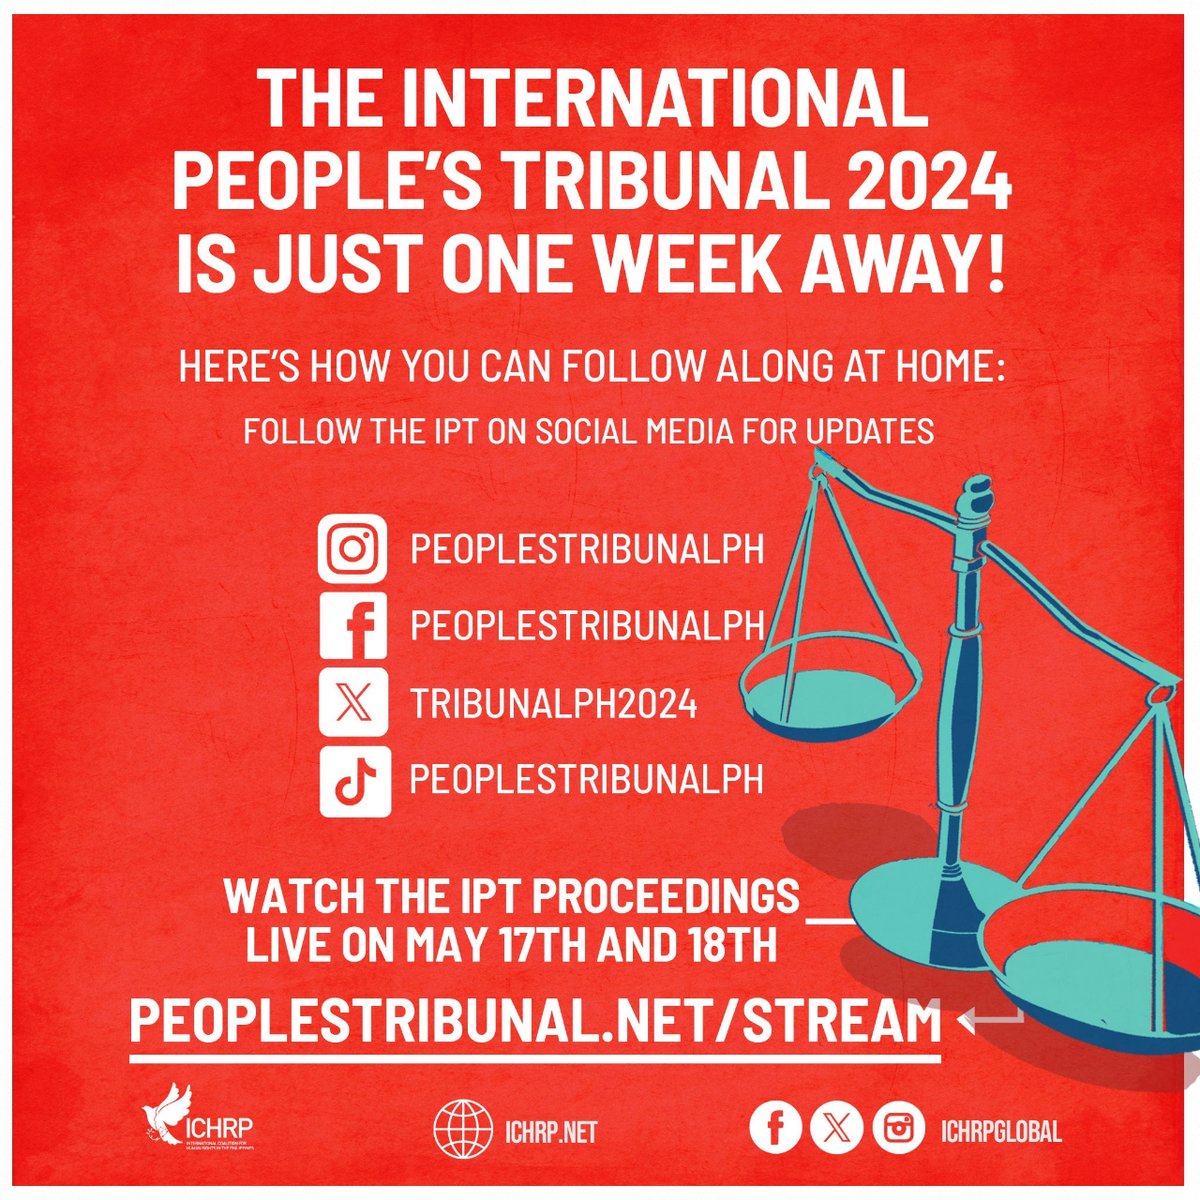 The International People’s Tribunal 2024 is just one week away! While registration for the in-person procedure is now closed, you can still get updates leading up to, and during, the IPT. Here’s how you can follow along at home: